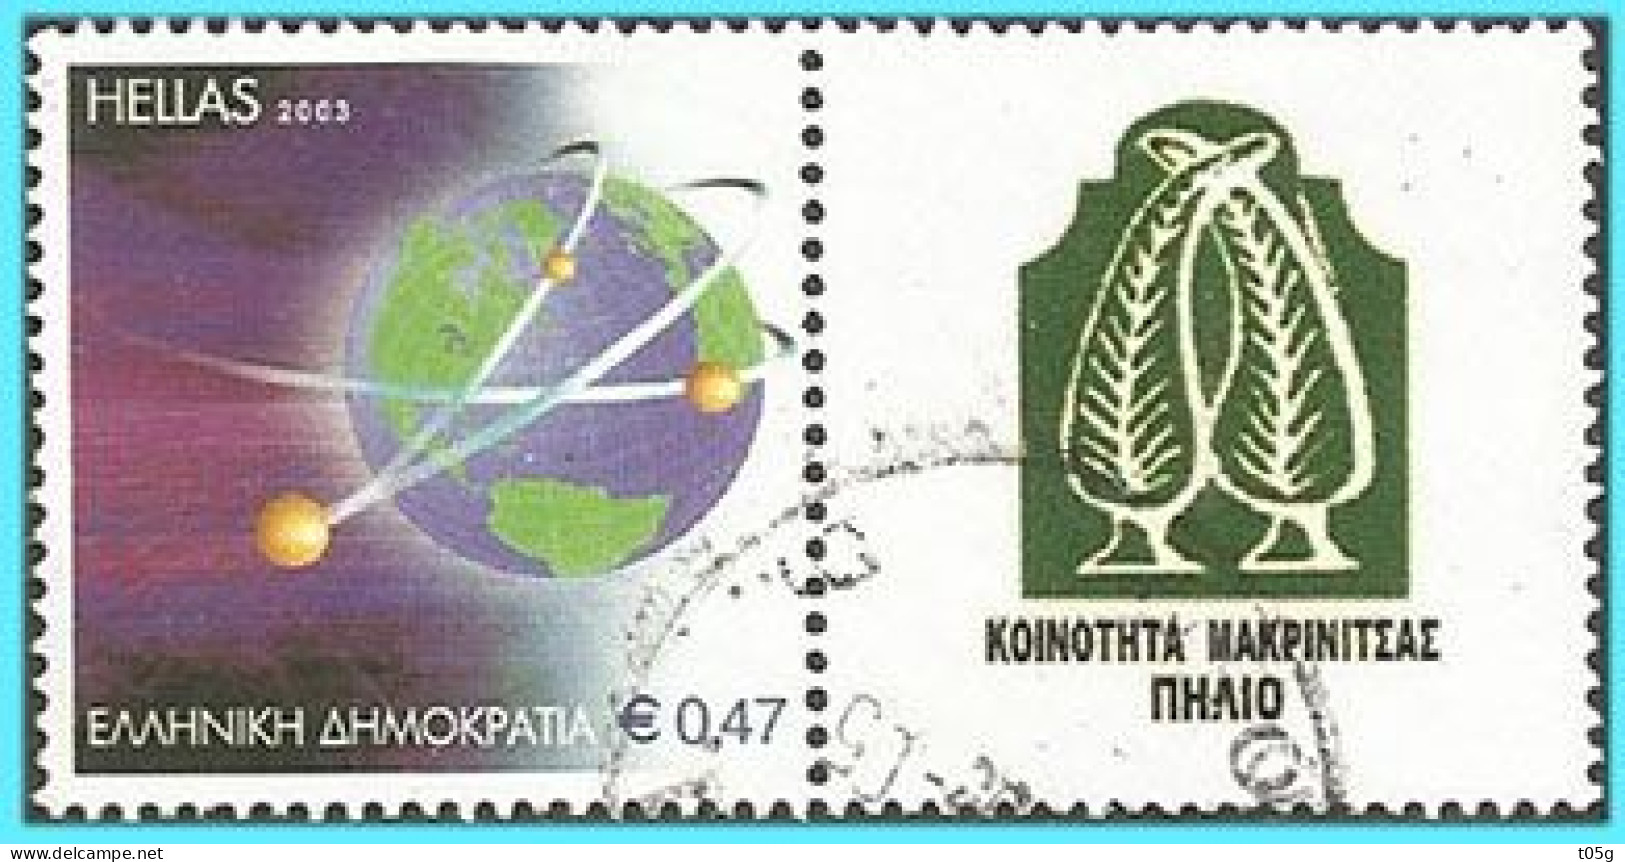 GREECE- GRECE- HELLAS 2001: Personalised Stamps Of Municipality Makrinitsas-Pilio Used - Oblitérés